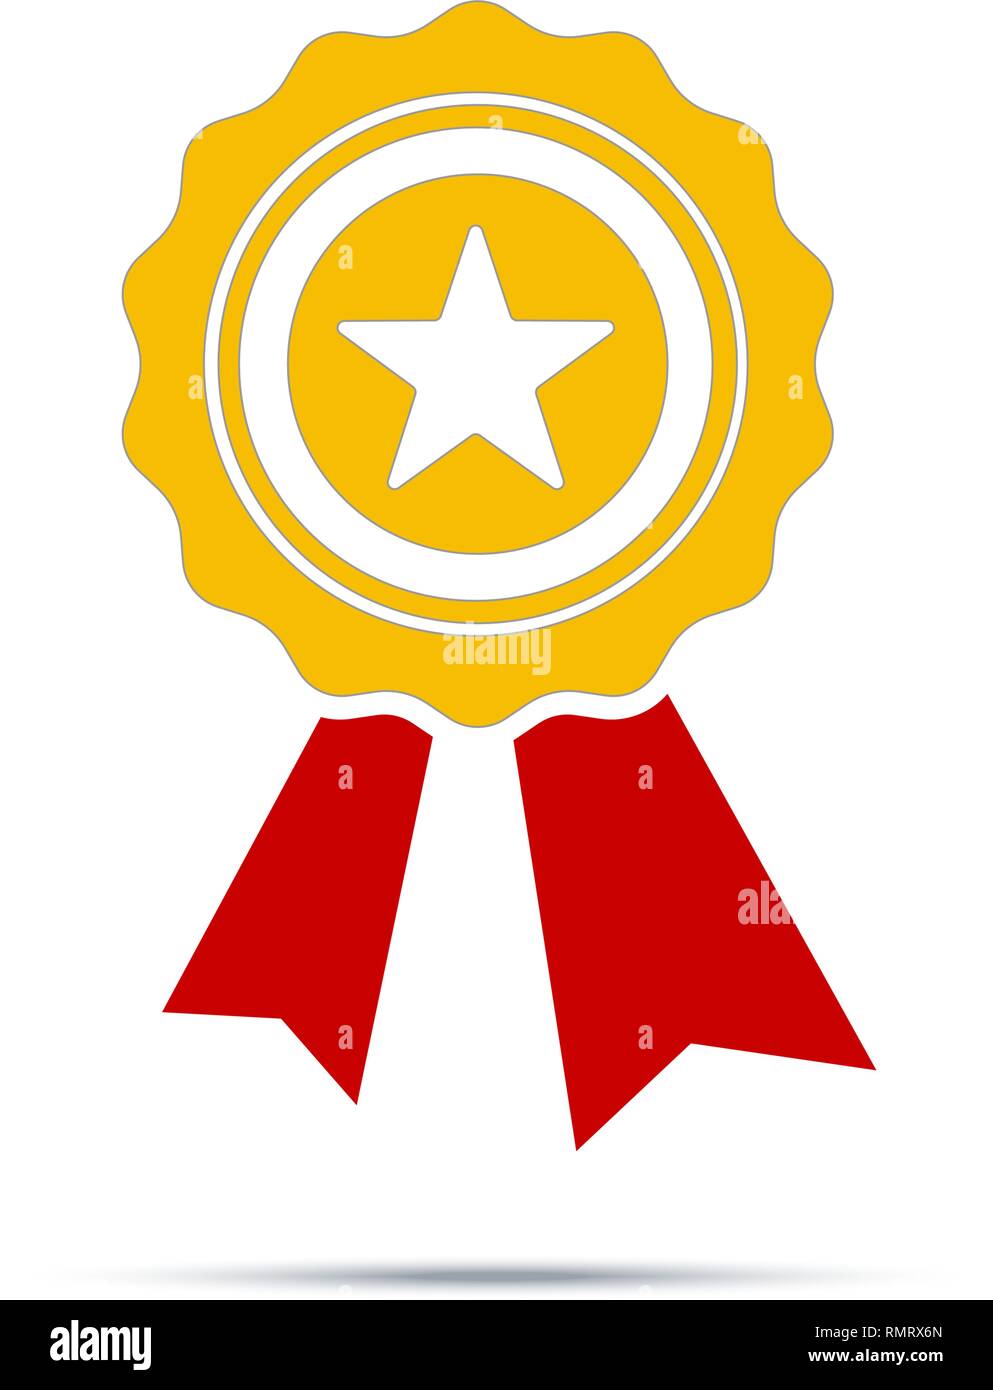 Best first prize won icon. Design vector element Stock Vector